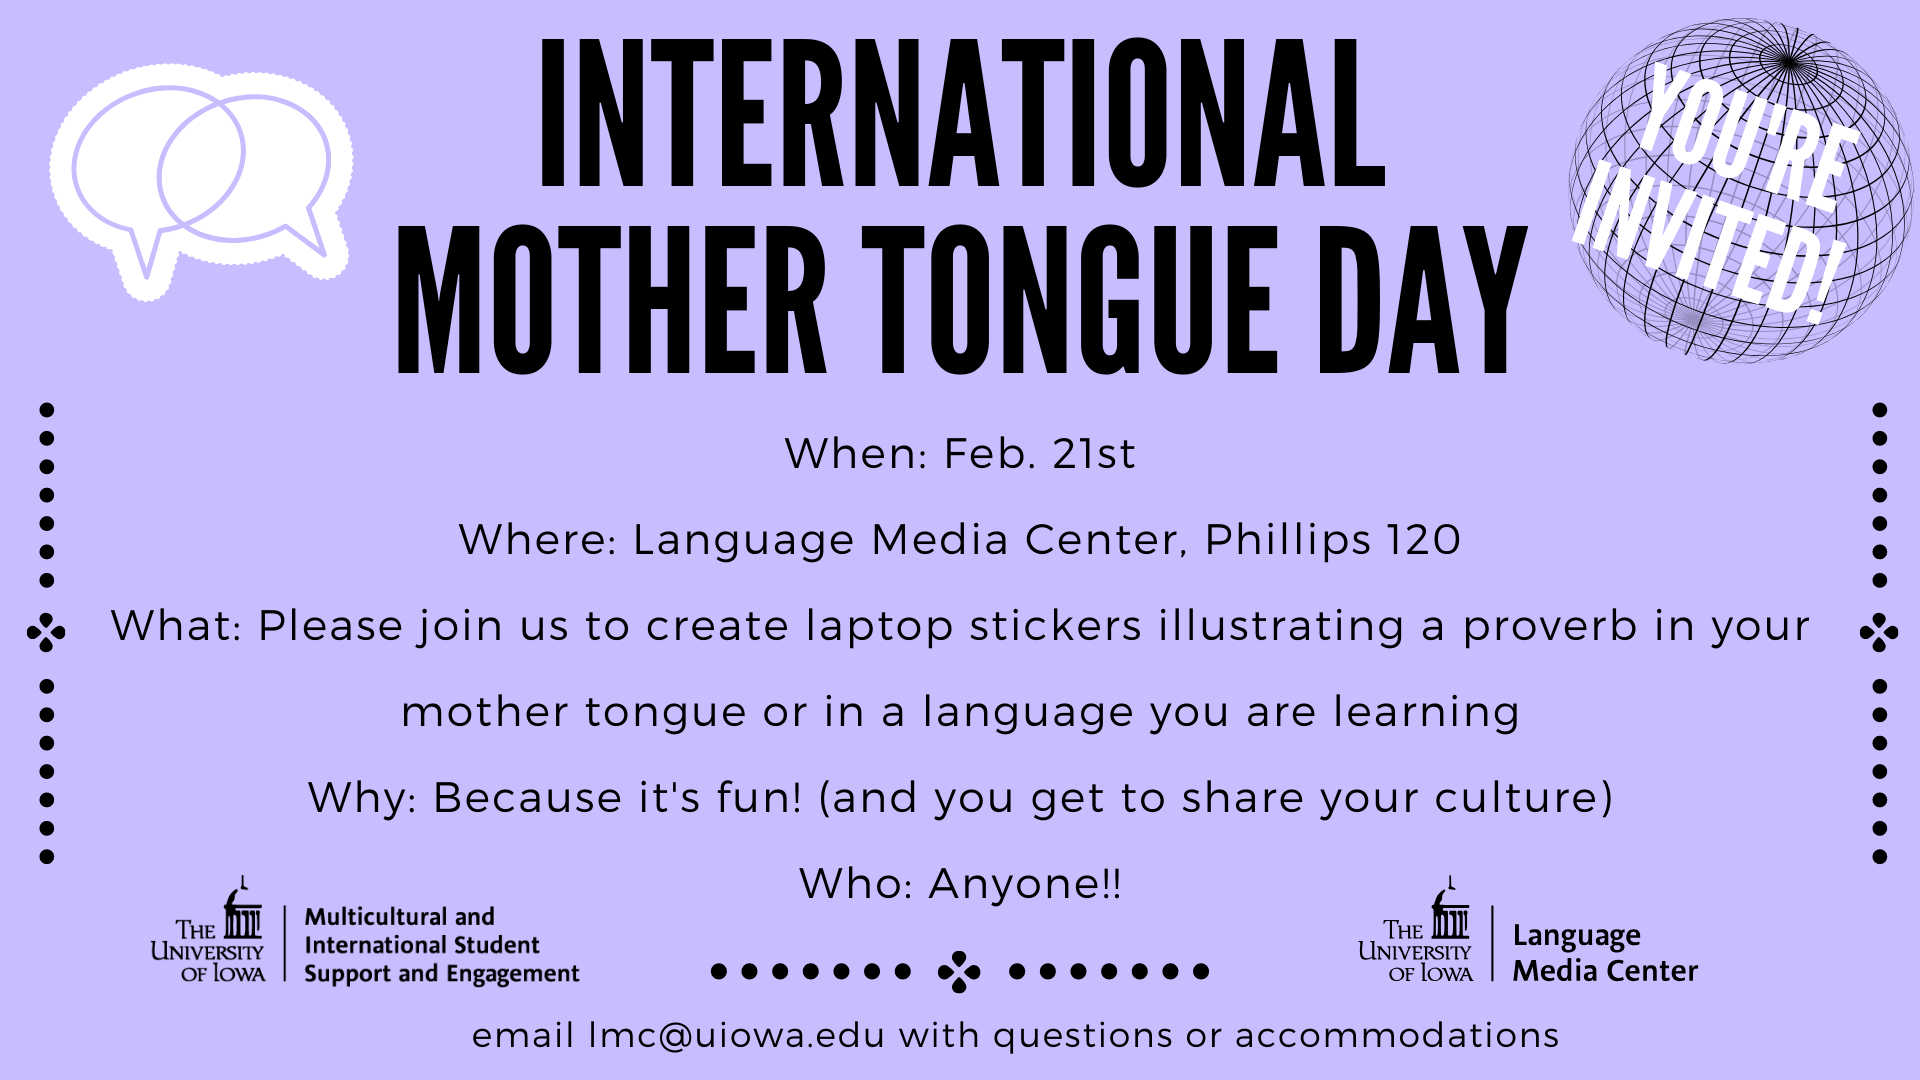 International Mother Tongue day feb 21st in 120 phillips hall please join us in creating stickers illustrating a proverb in your mothe tongue or a language you are learning. Because it's fun anf you get to share your culture anyone welcome